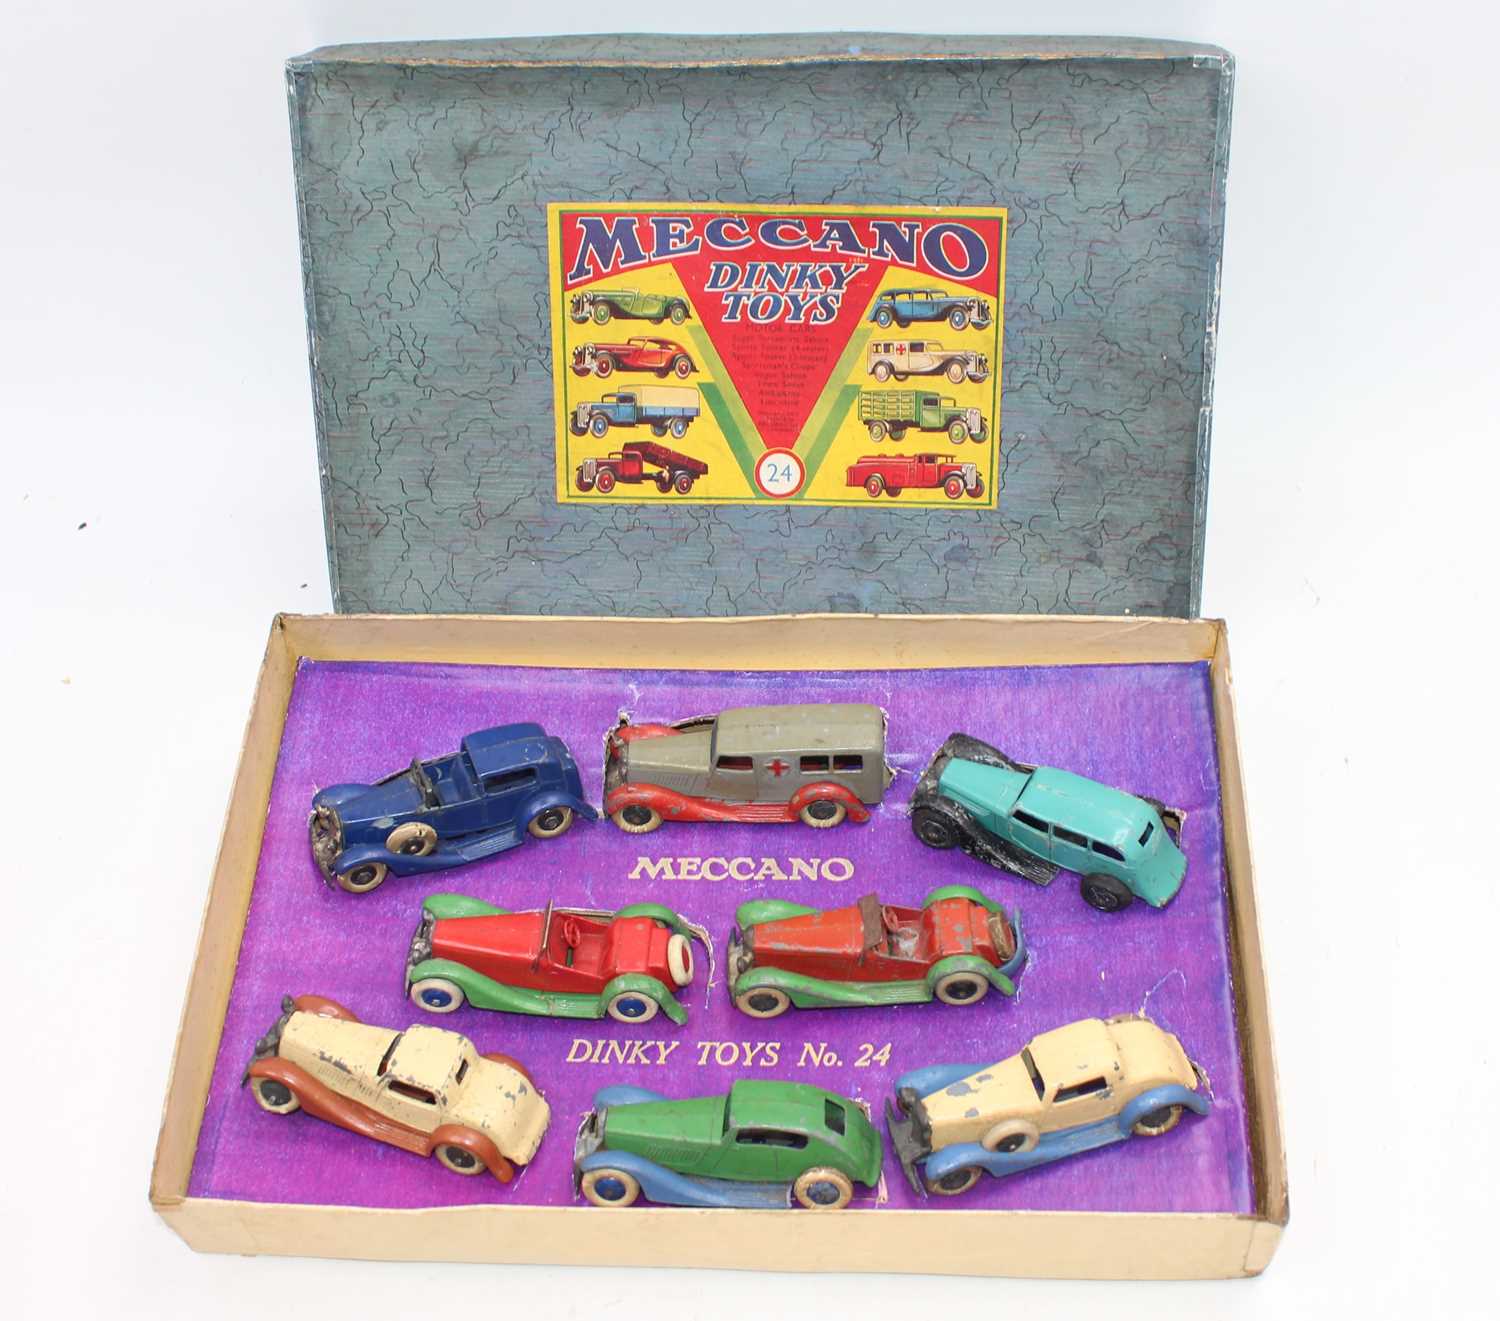 Dinky pre-war no.24 gift set with original base and lid and reproduction inner packing, all models